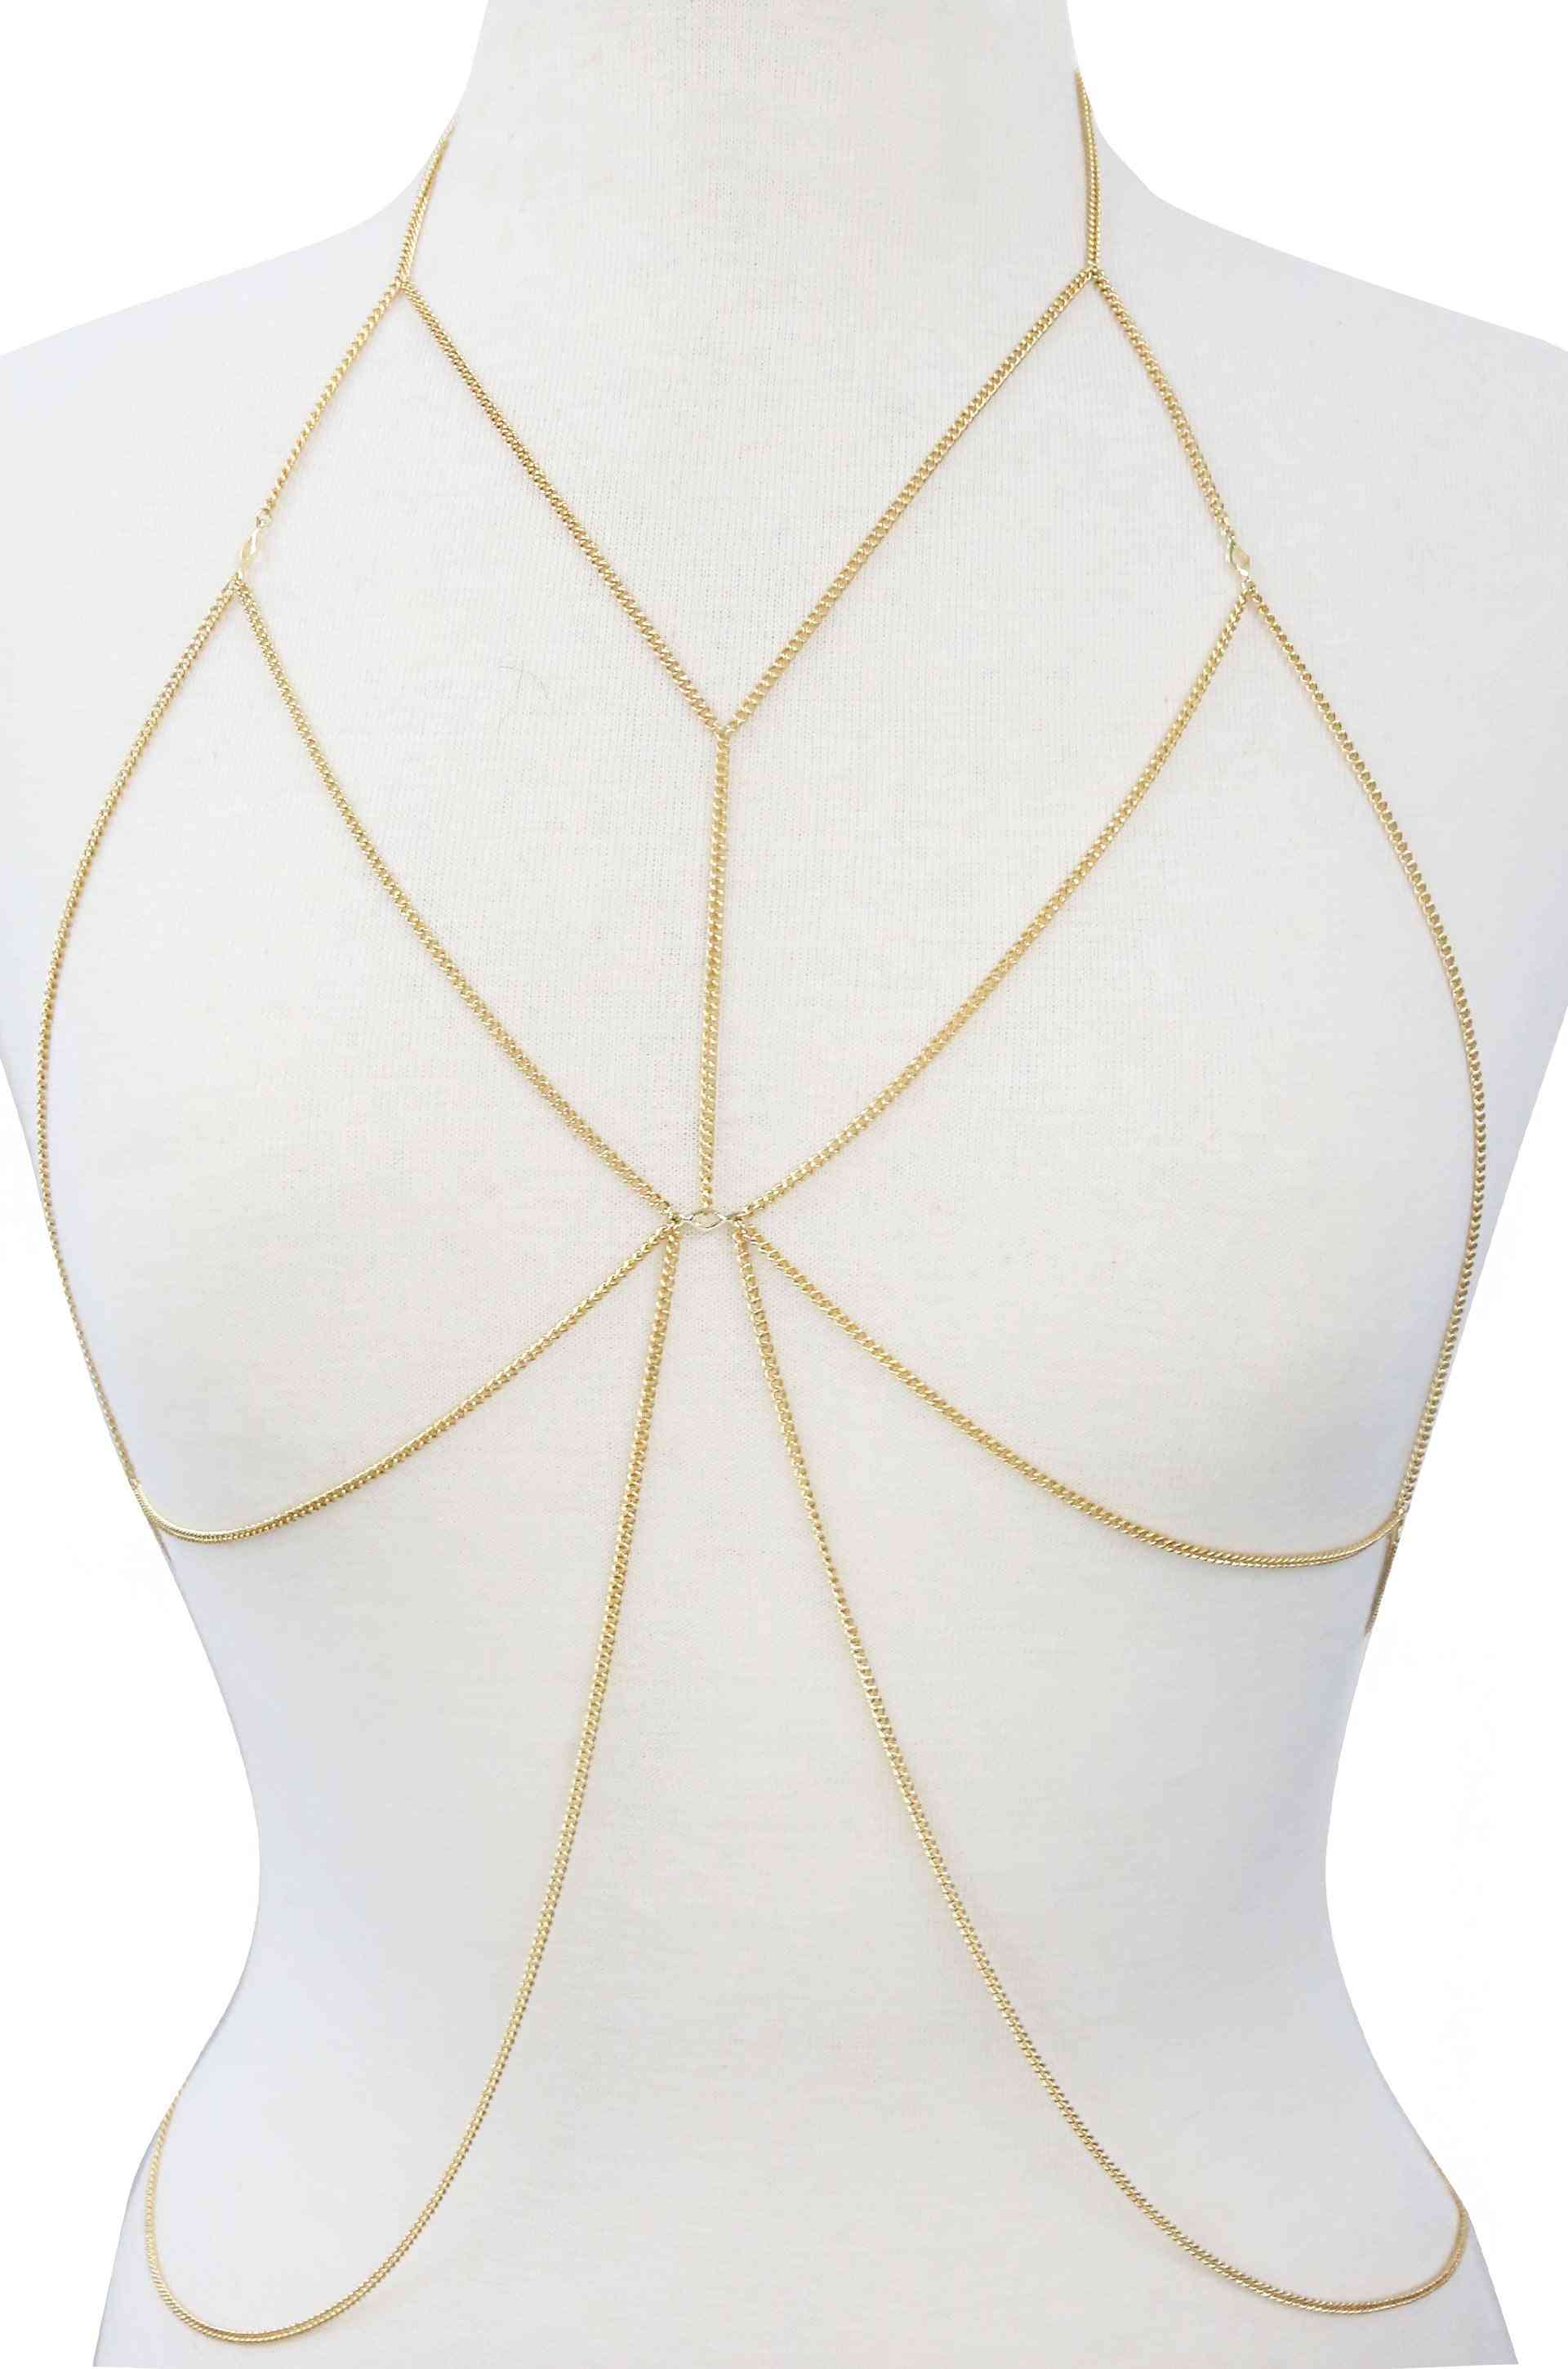 Amazing Armor Chain Bralette In Gold